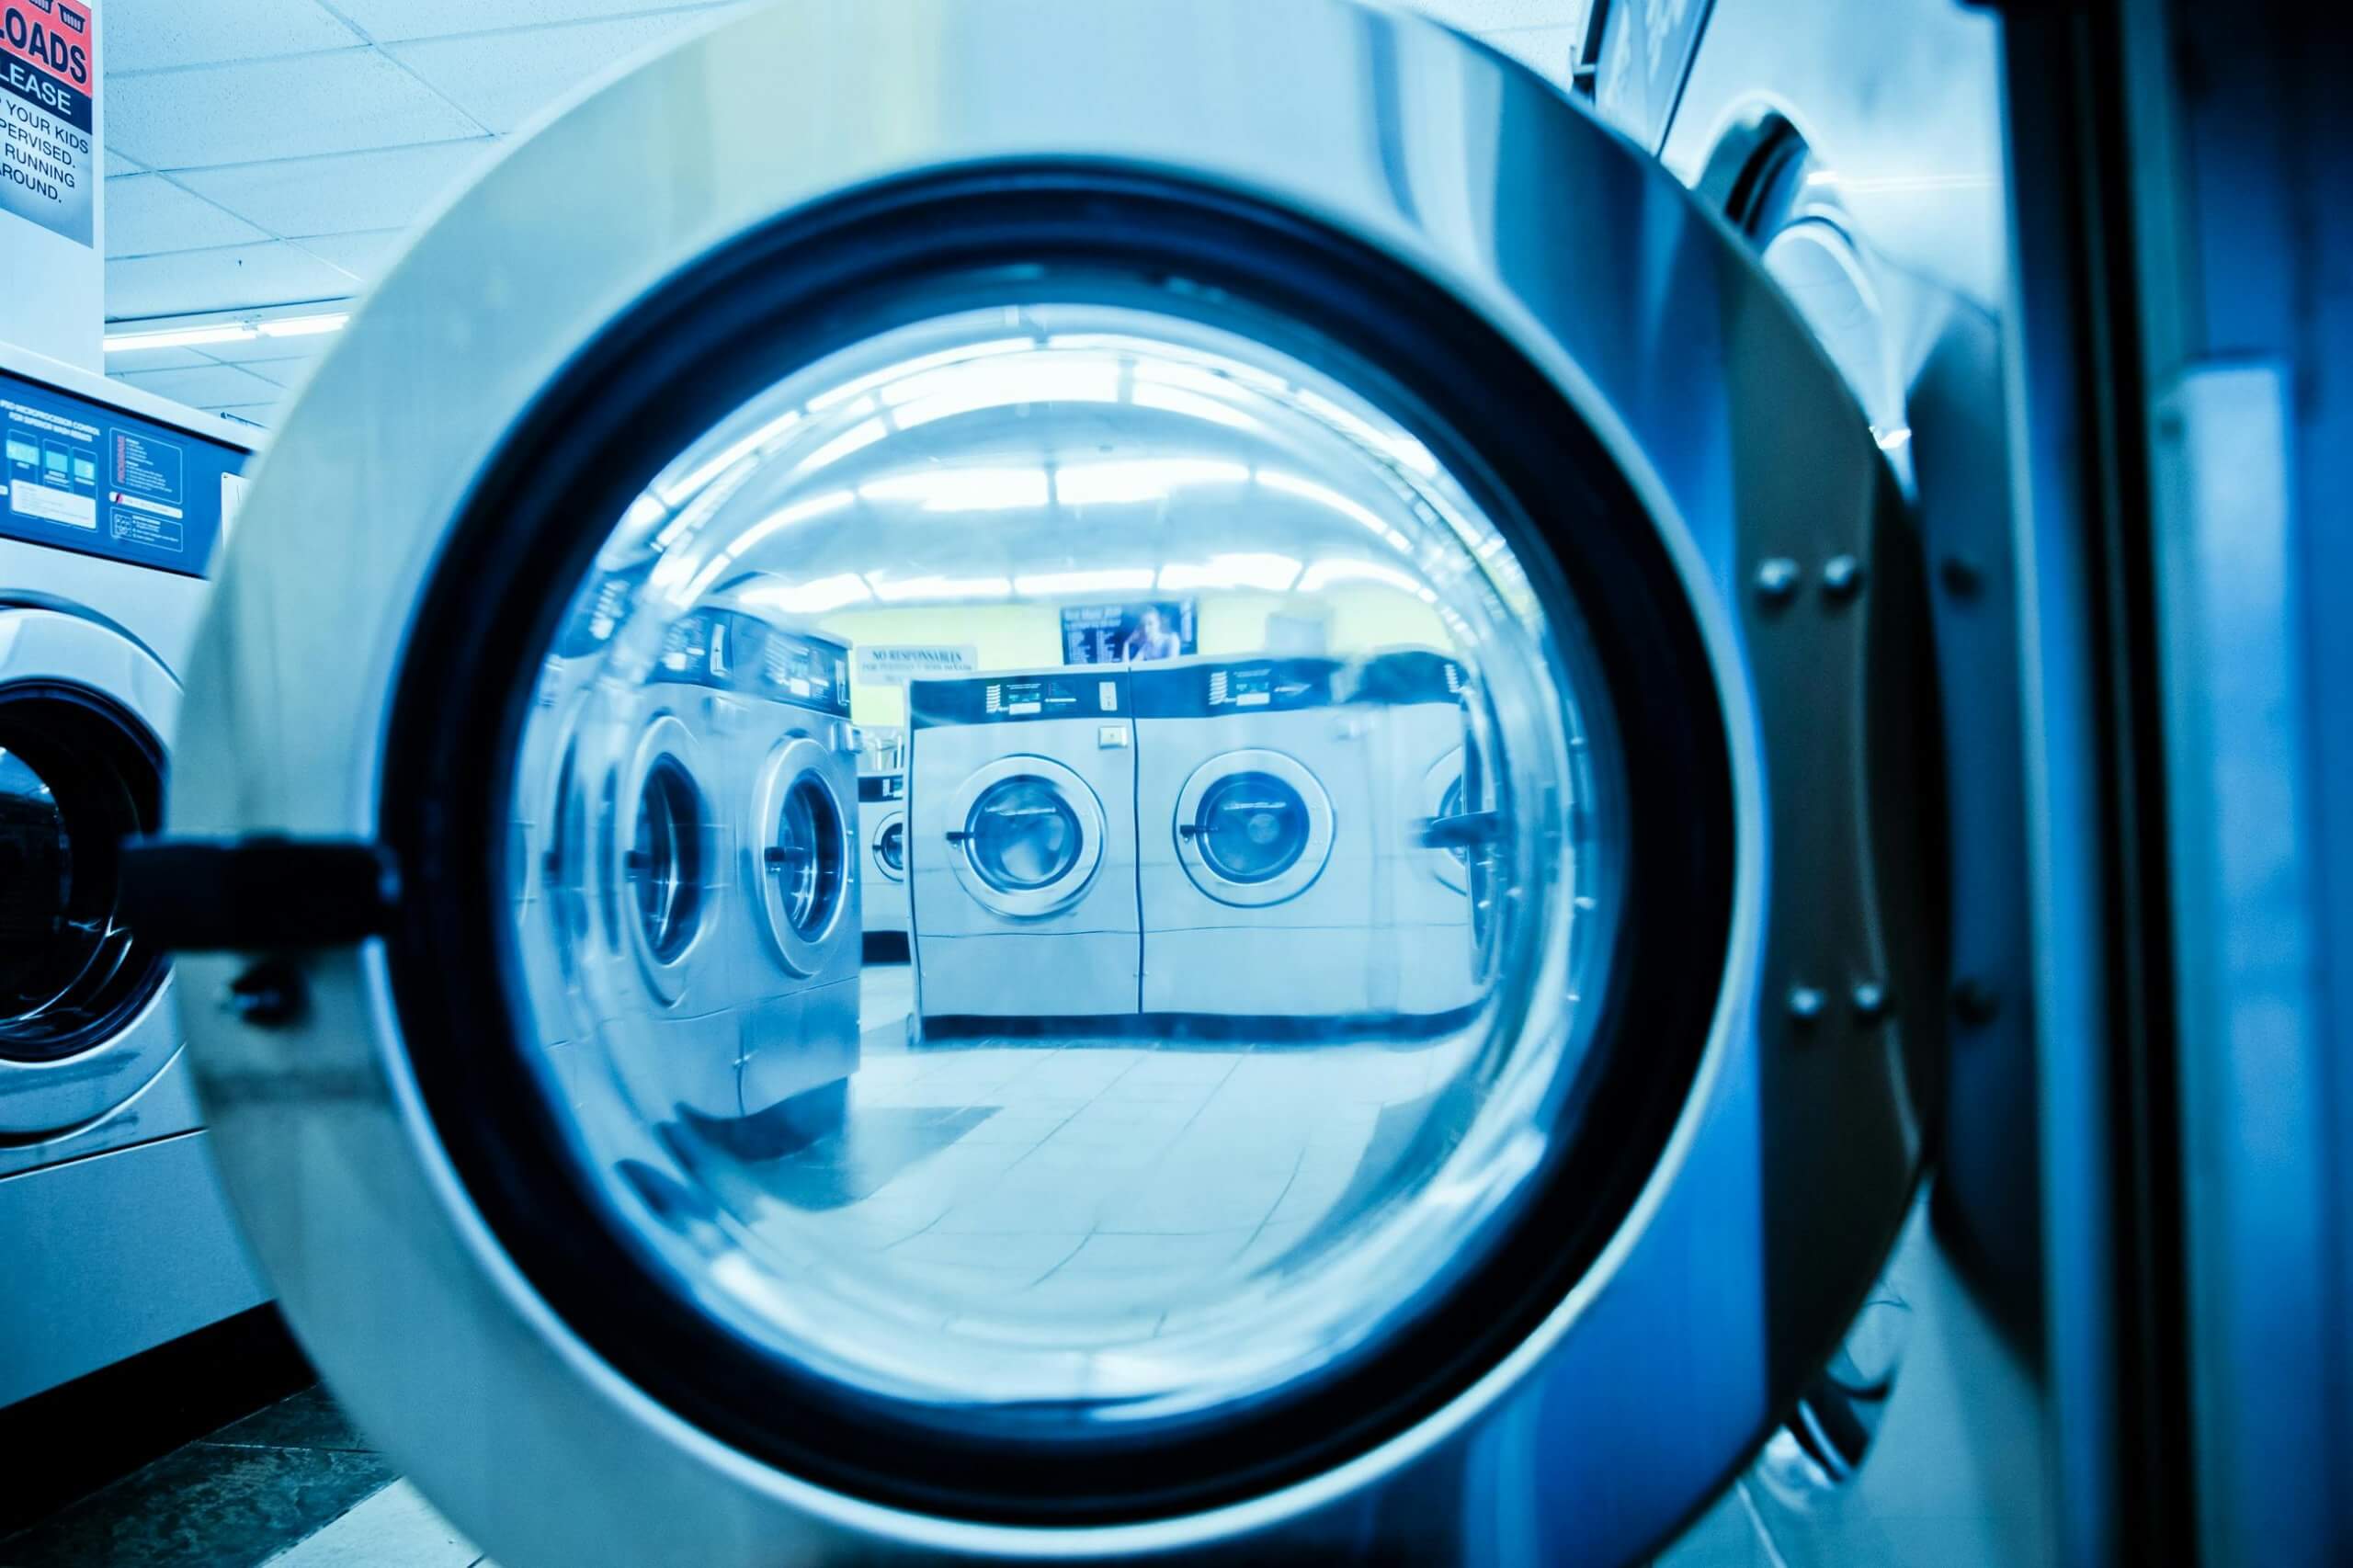 Students Discover Security Vulnerability Allowing Free Use of Laundry Machines